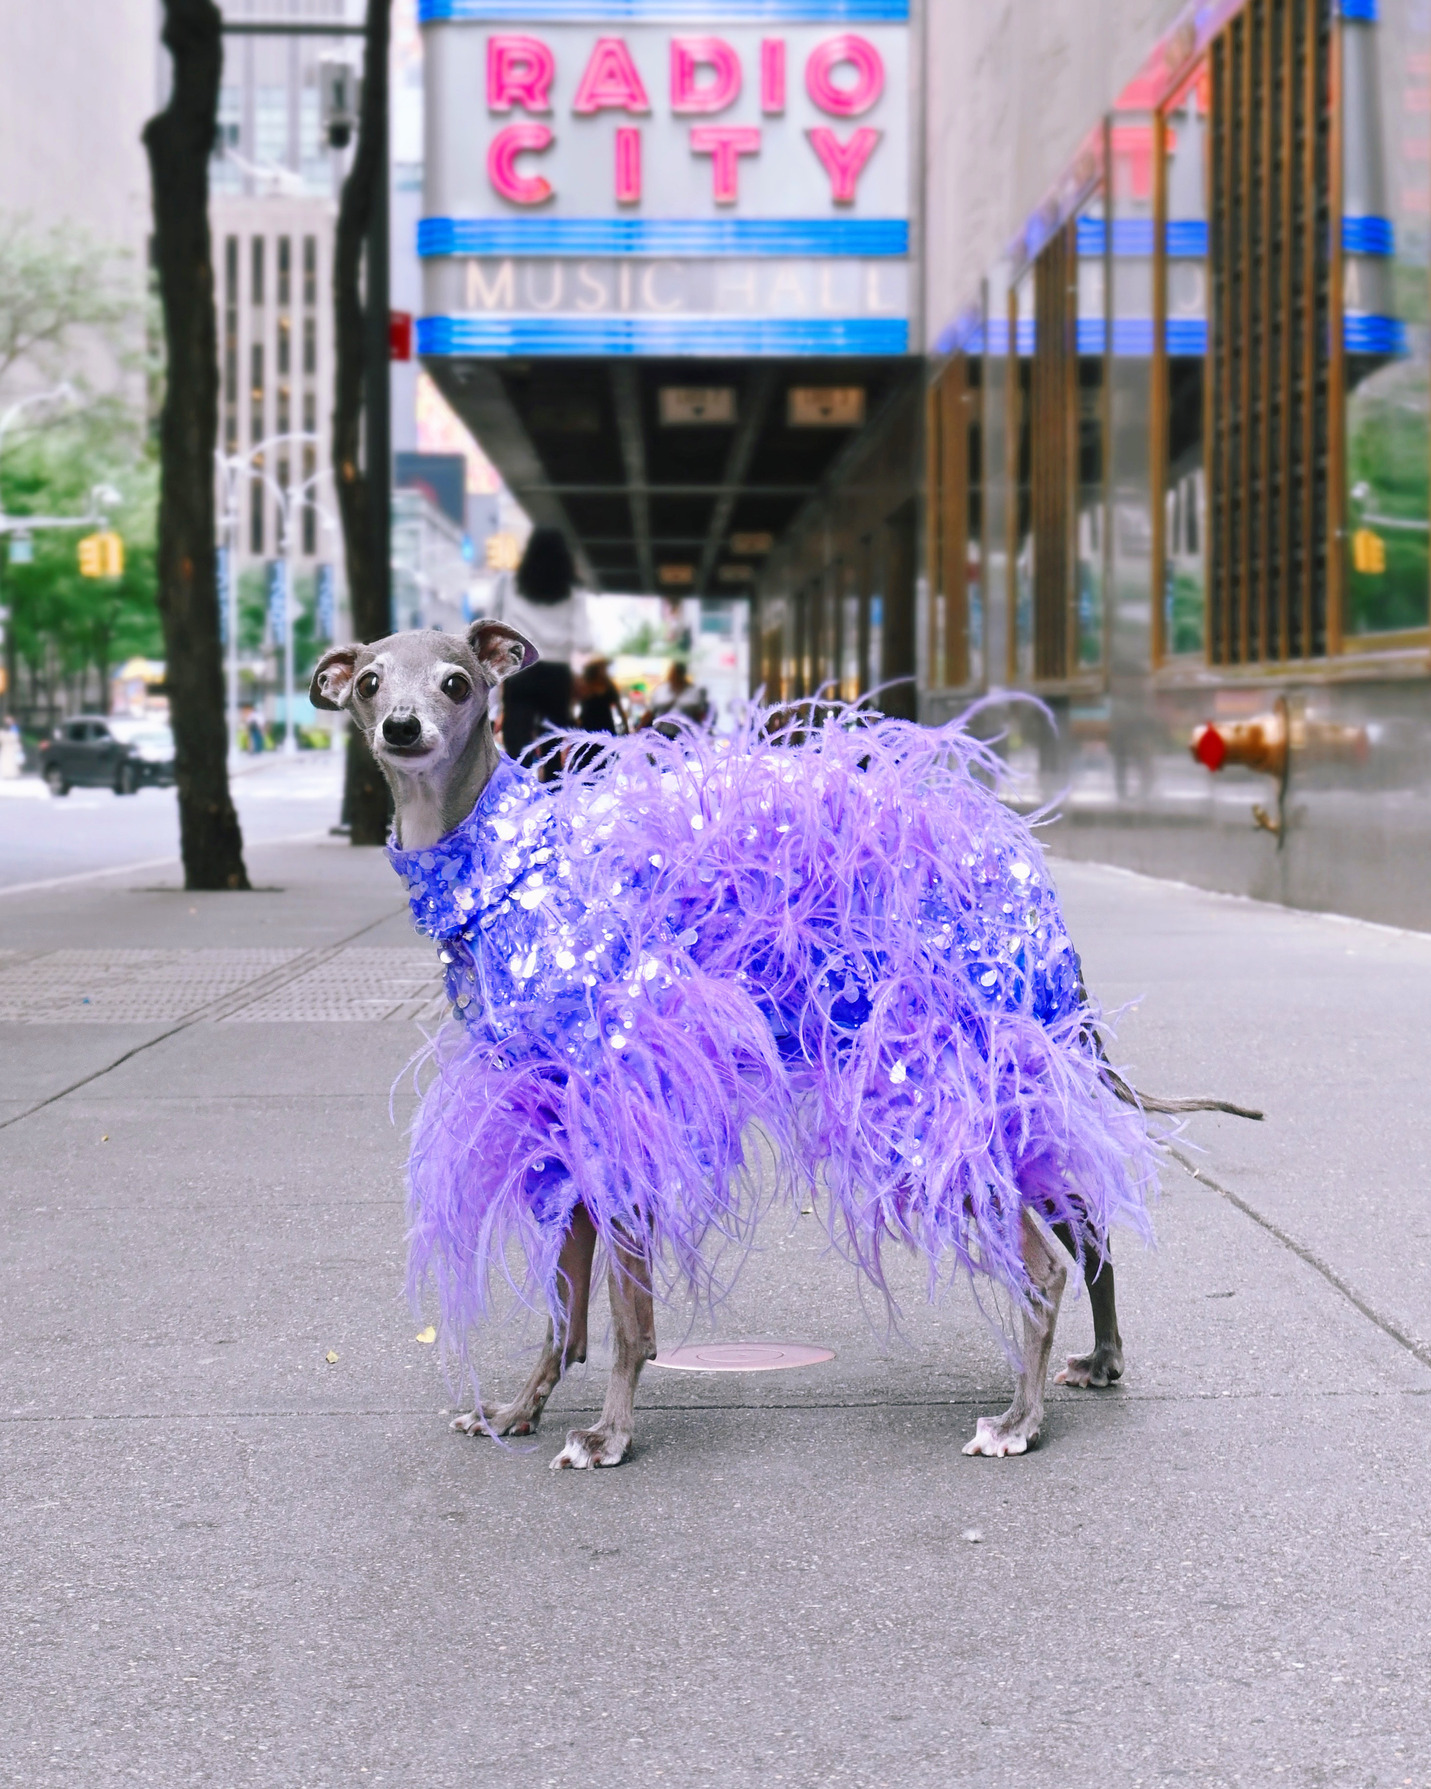 Italian greyhound Tika the Iggy in a violet outfit with sequins and feathers. She is on the sidewalk standing under the Radio City marquee in New York City.